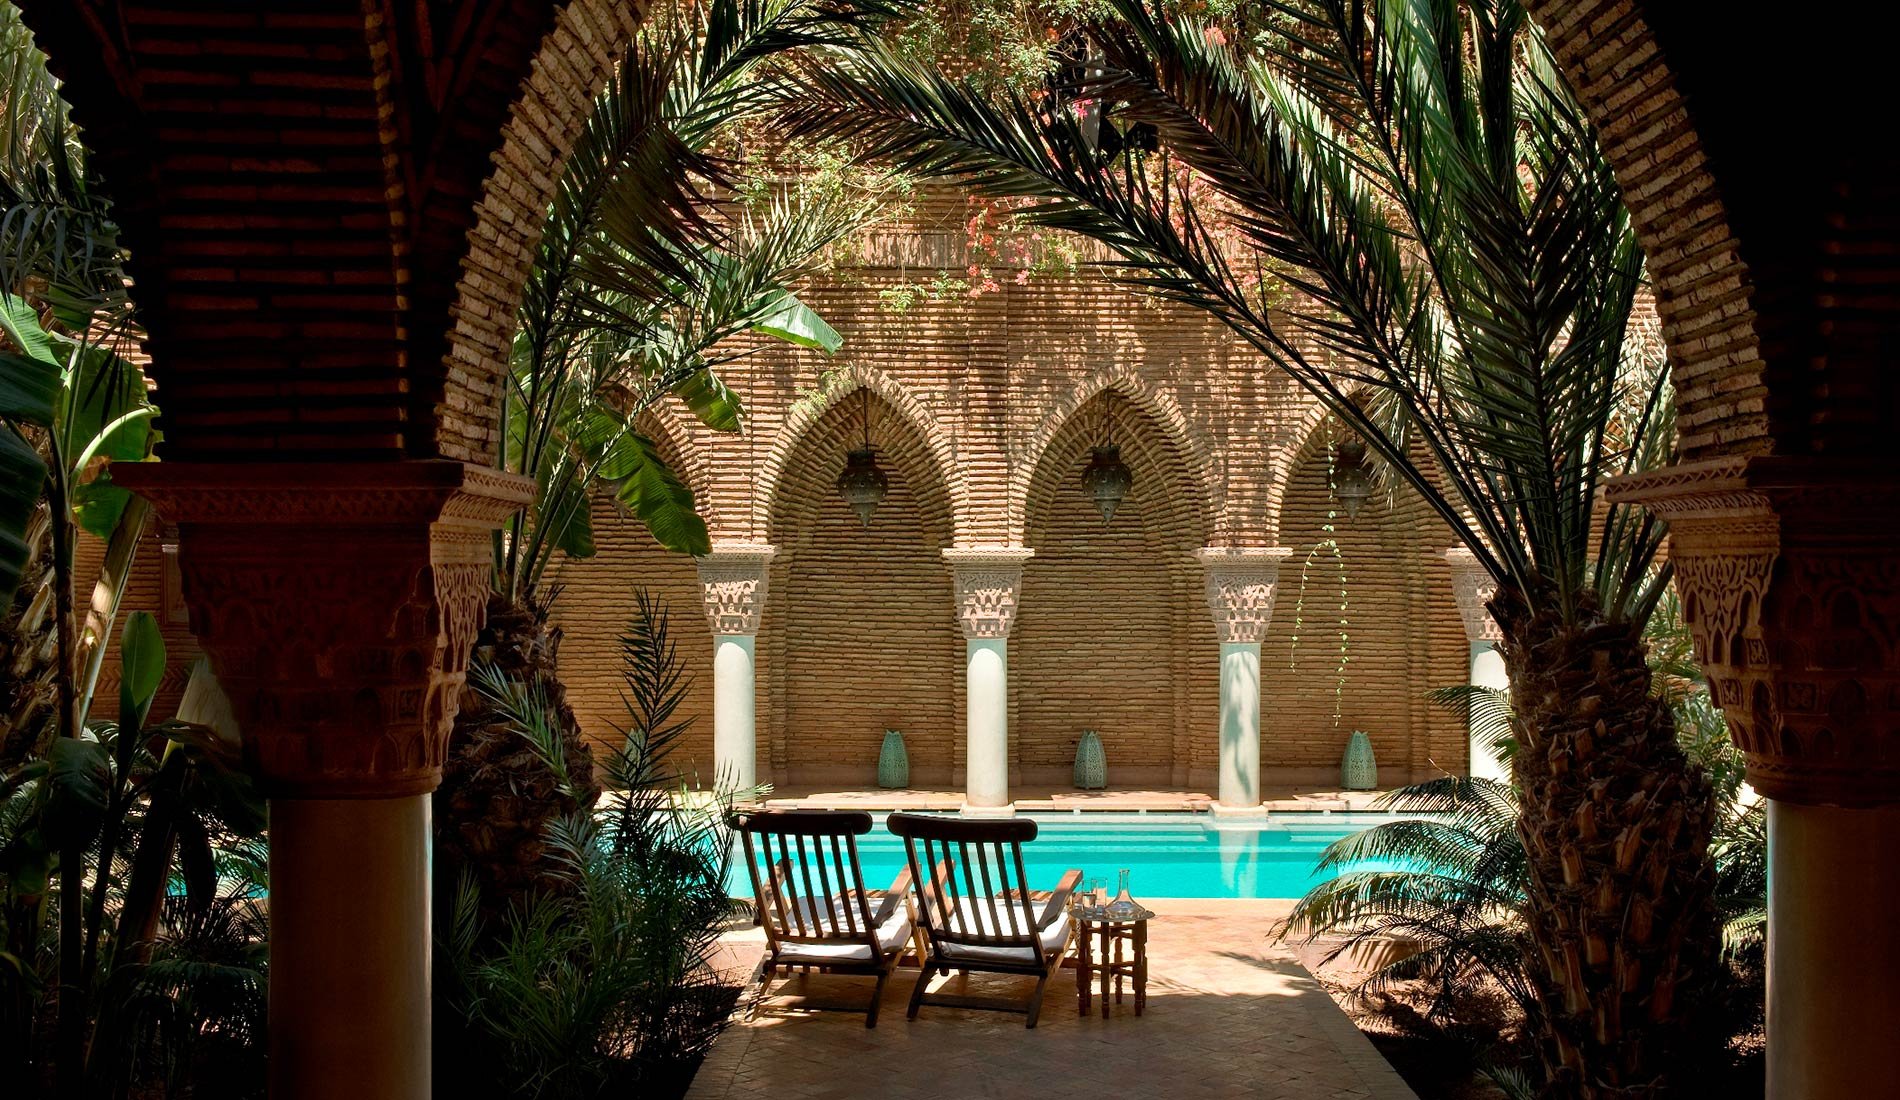 → The Sultana Marrakech, 5* luxury hotel in Morocco | TemptingPlaces